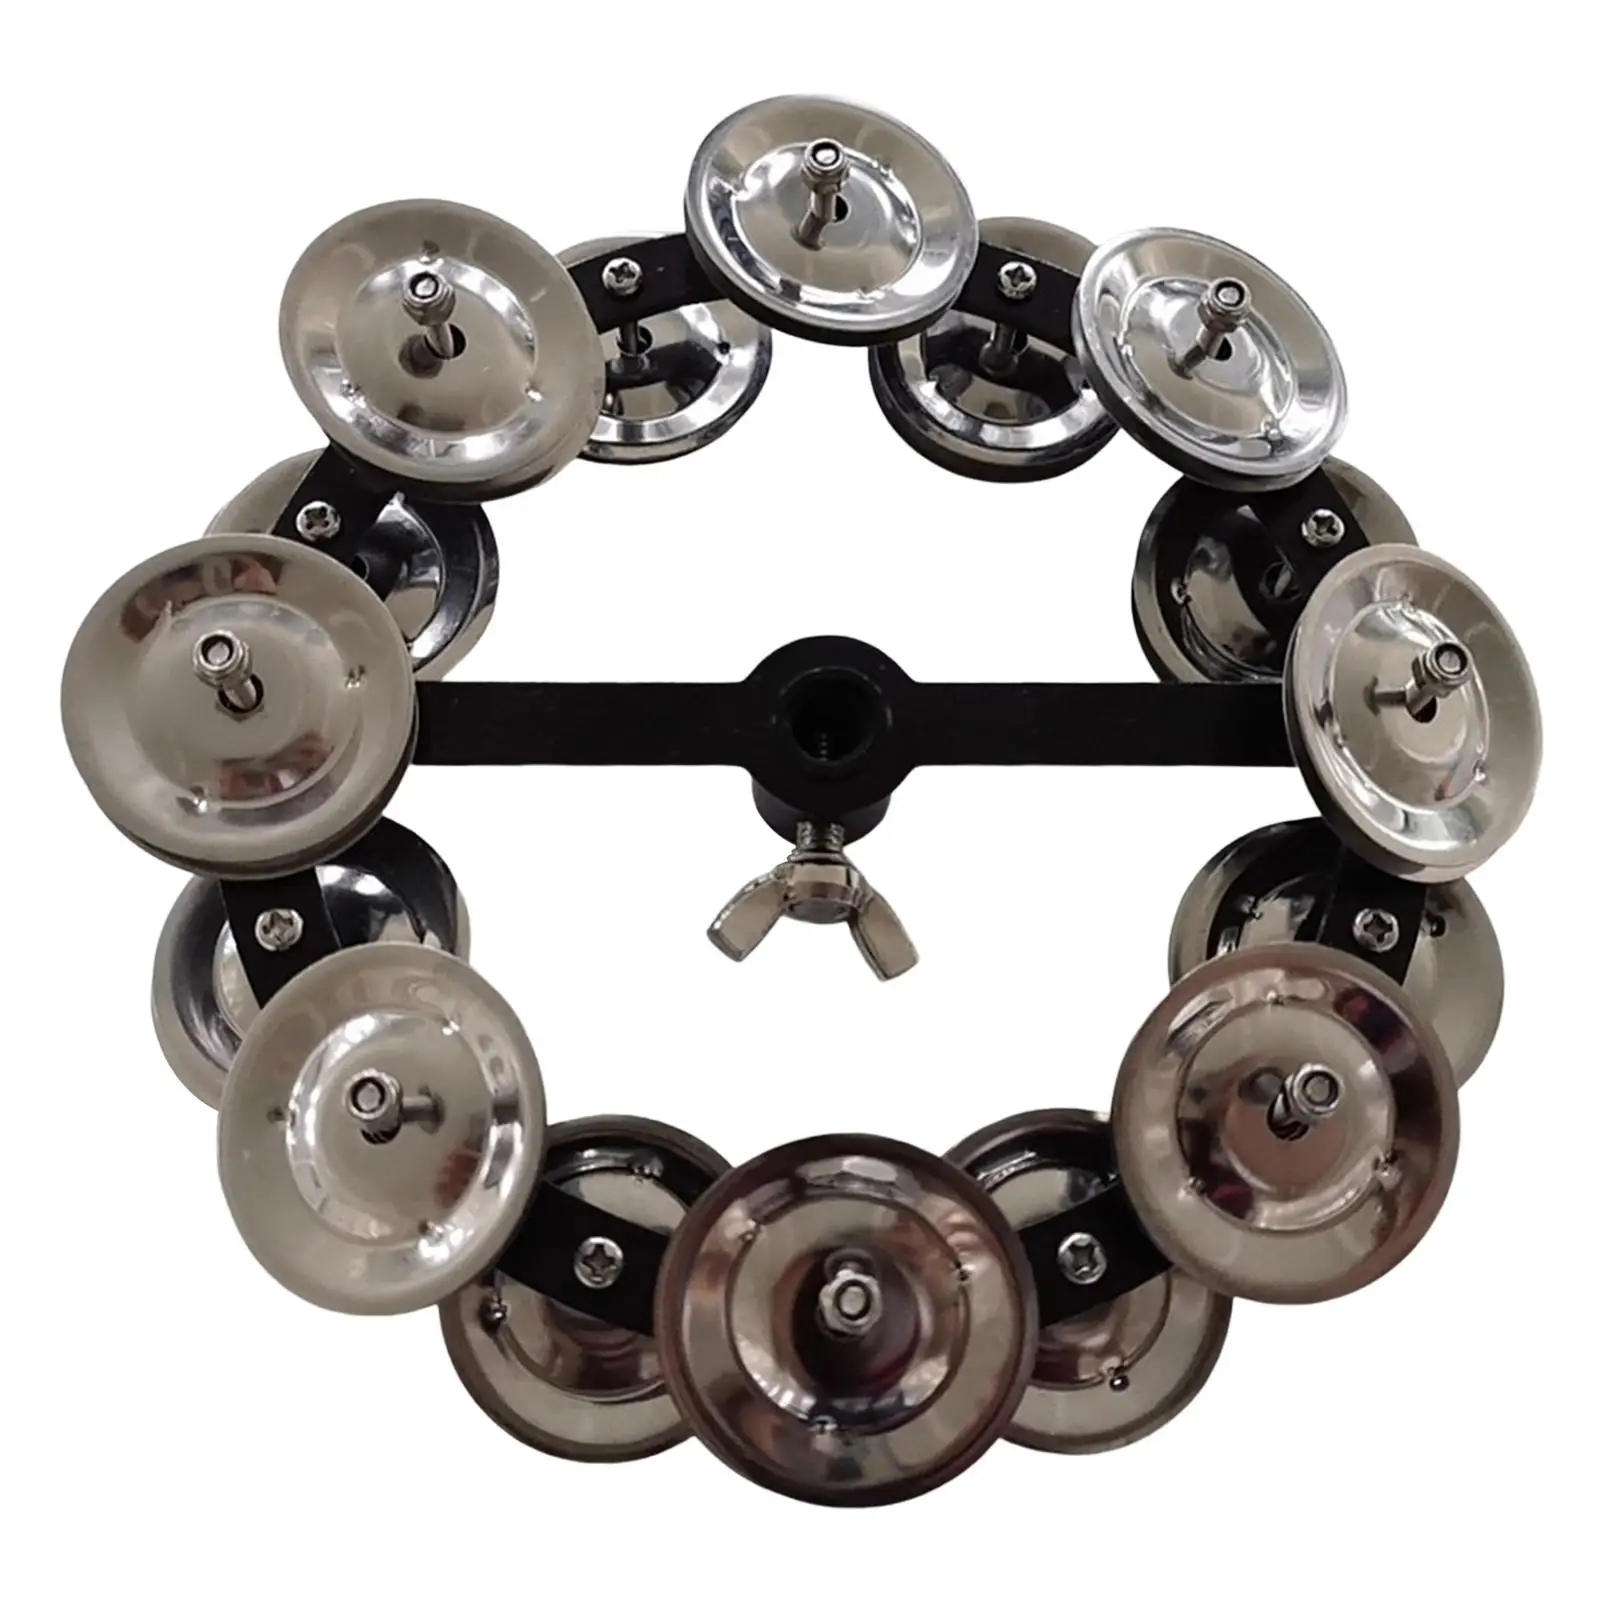 Musical Hi Hat Tambourine Hand Held Percussion Metal Shaker for Band Party KTV Concert